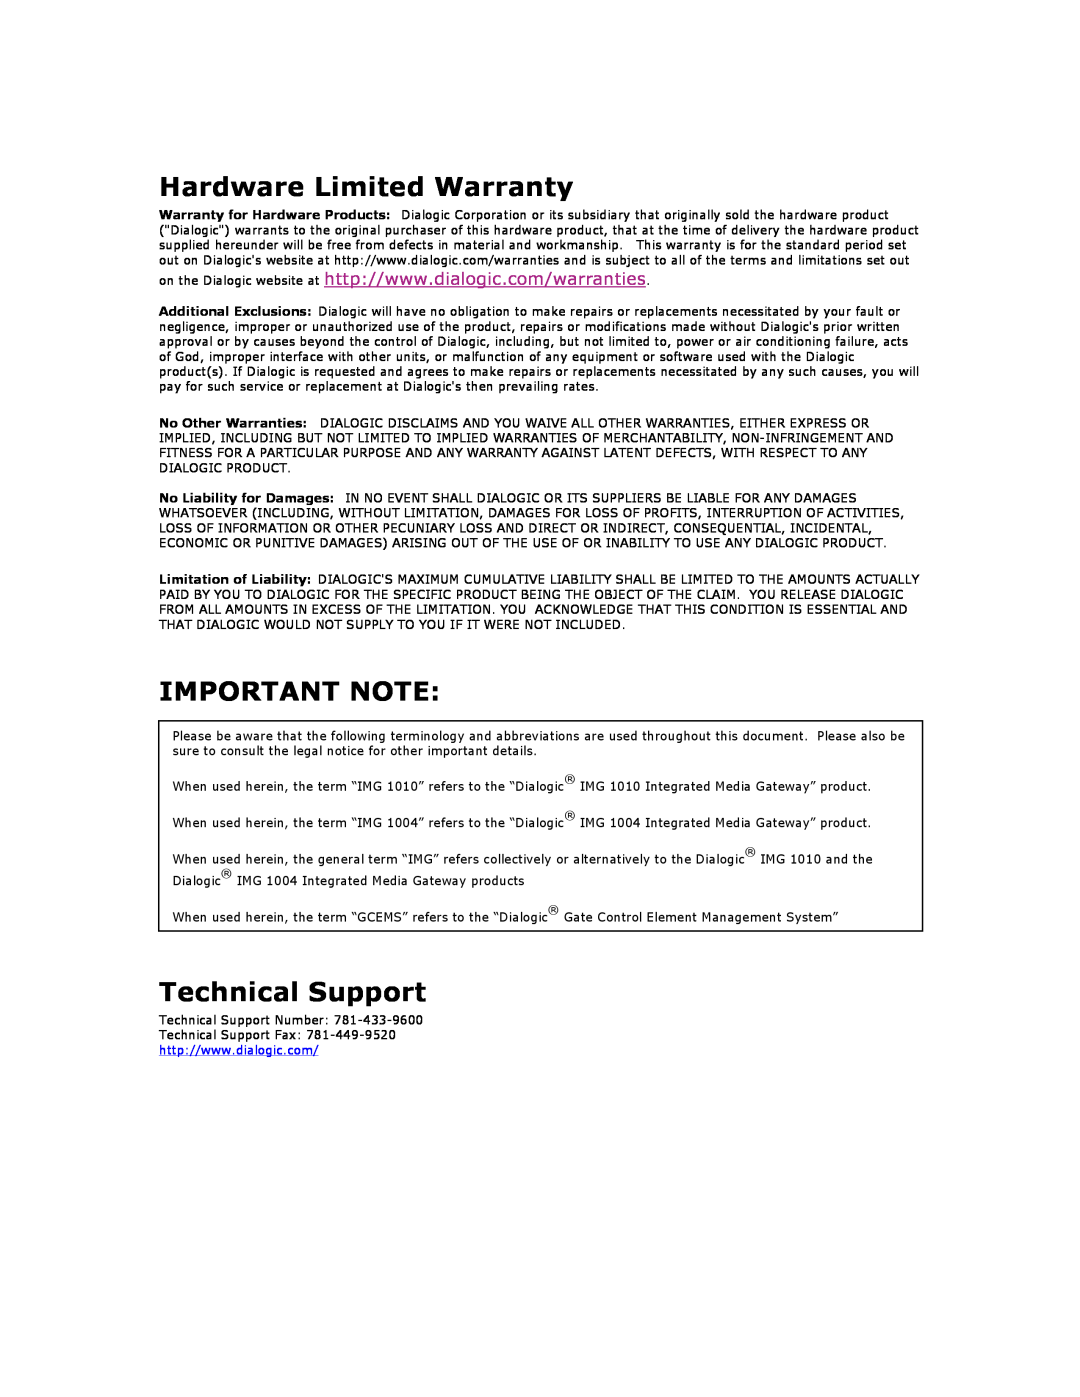 Dialogic 1010 manual Hardware Limited Warranty, Important Note, Technical Support 